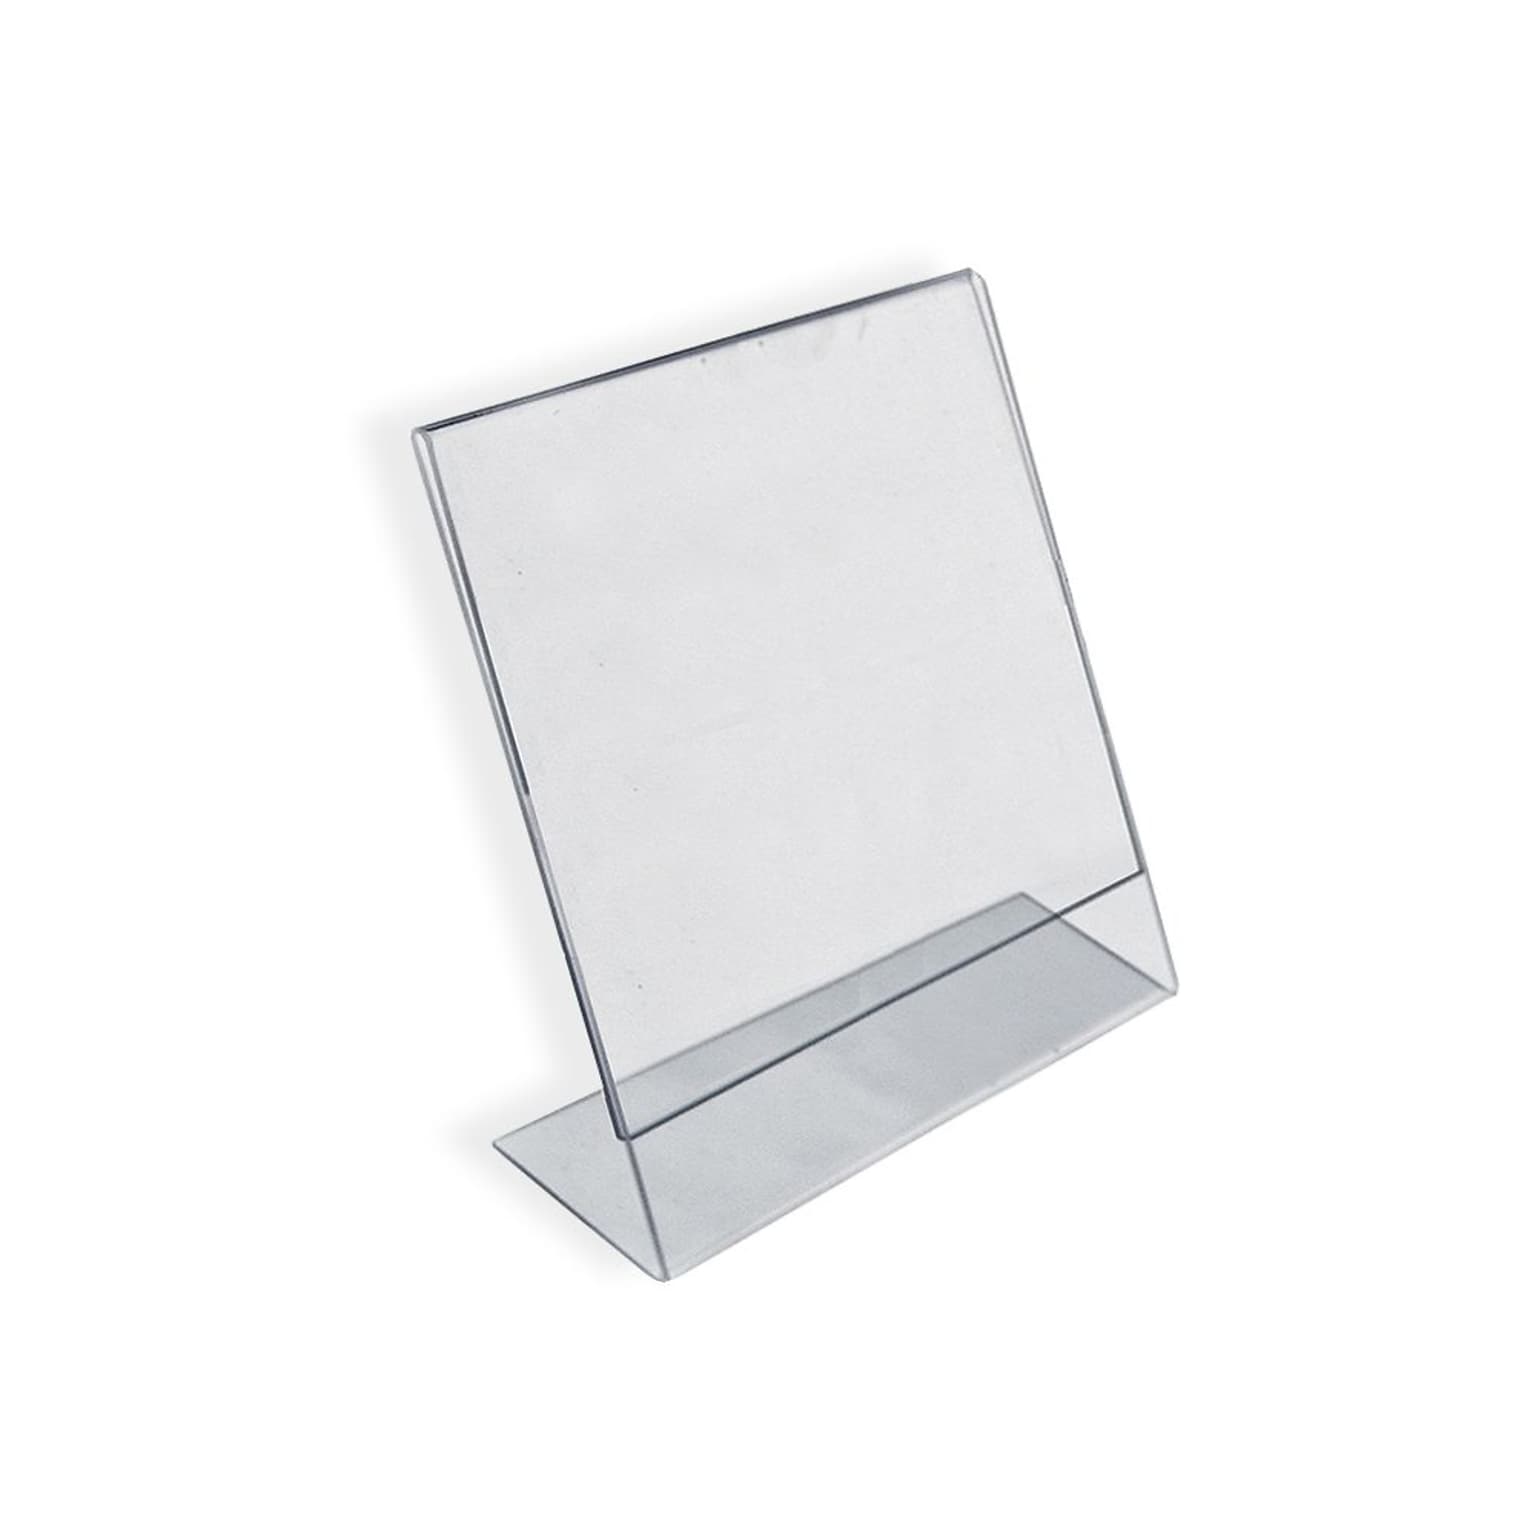 Azar Displays Angled L-Shaped Sign Holder Frame 2x 3High- Vertical/Portrait. Photo Booth Size, 10-Pack (112741)